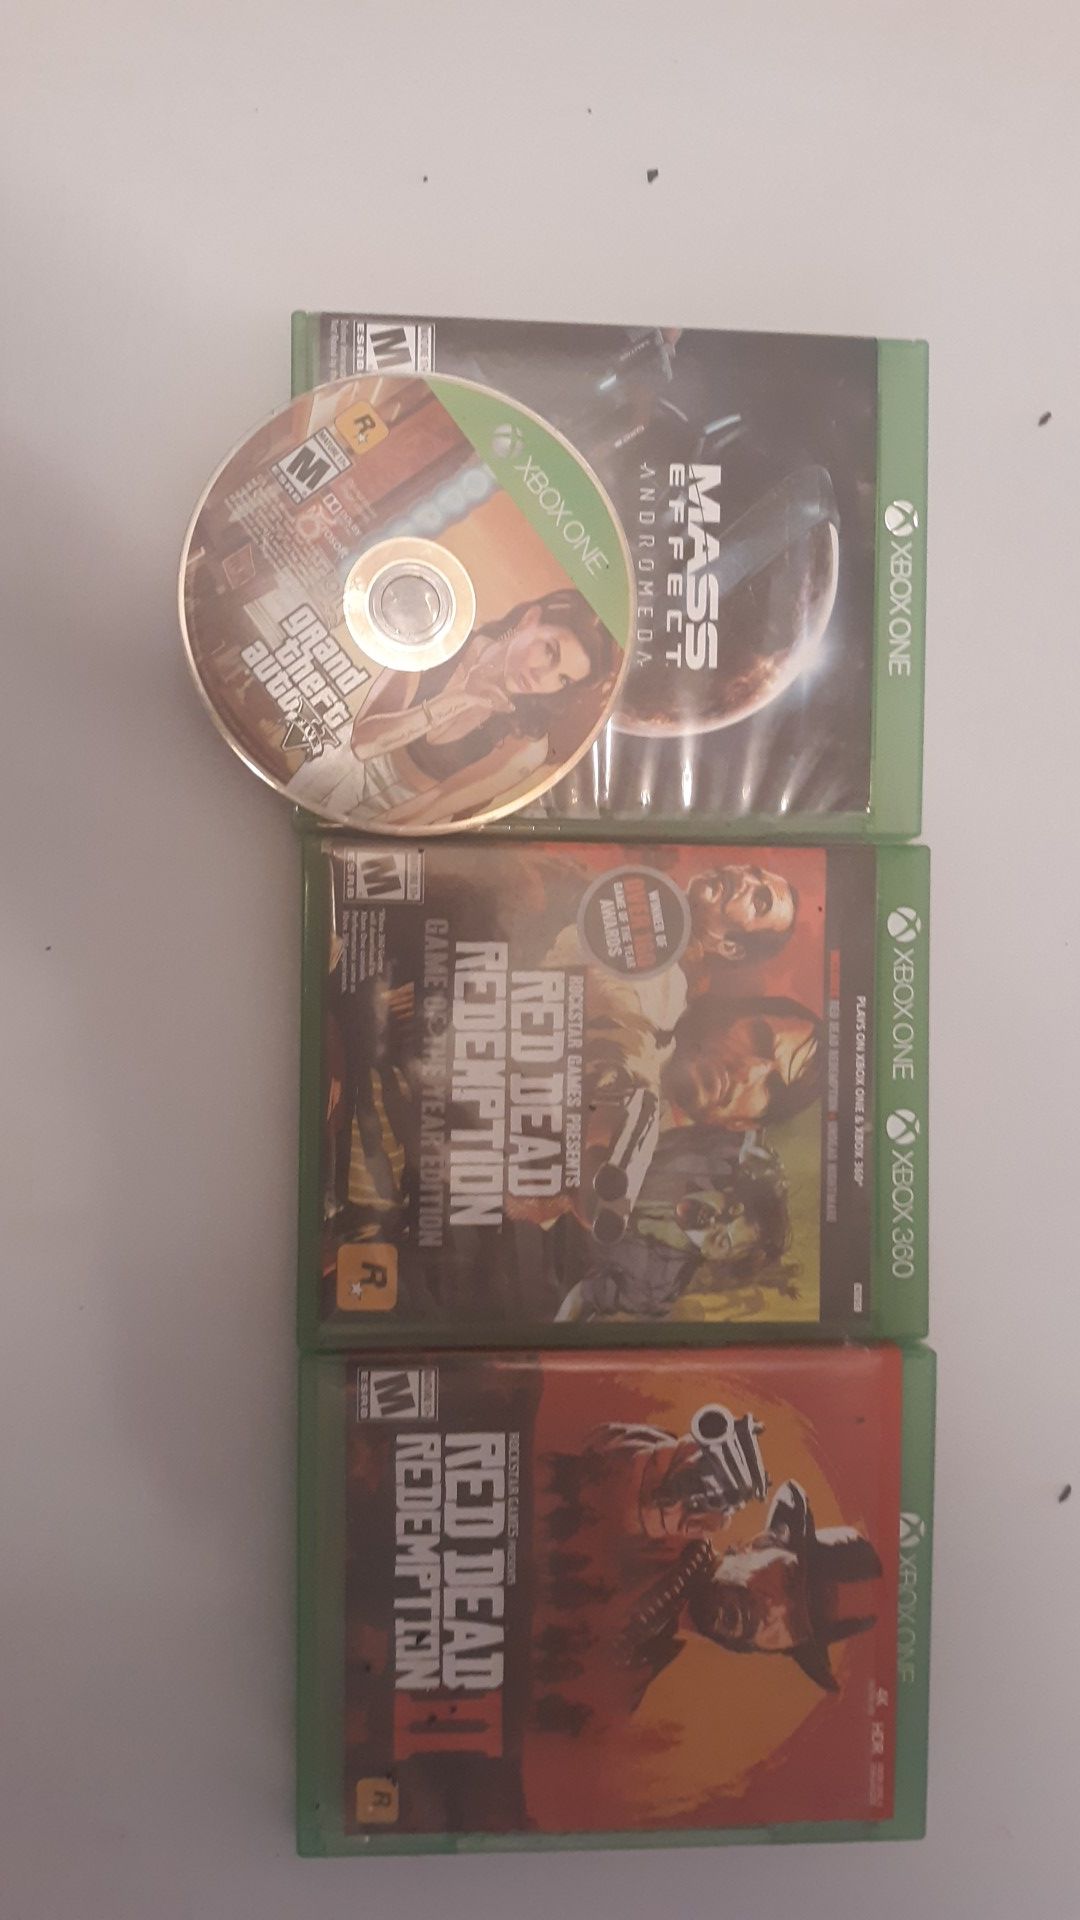 Xboxone Gta5 Red Dead 1 and 2!! Also Mass effect For FREE